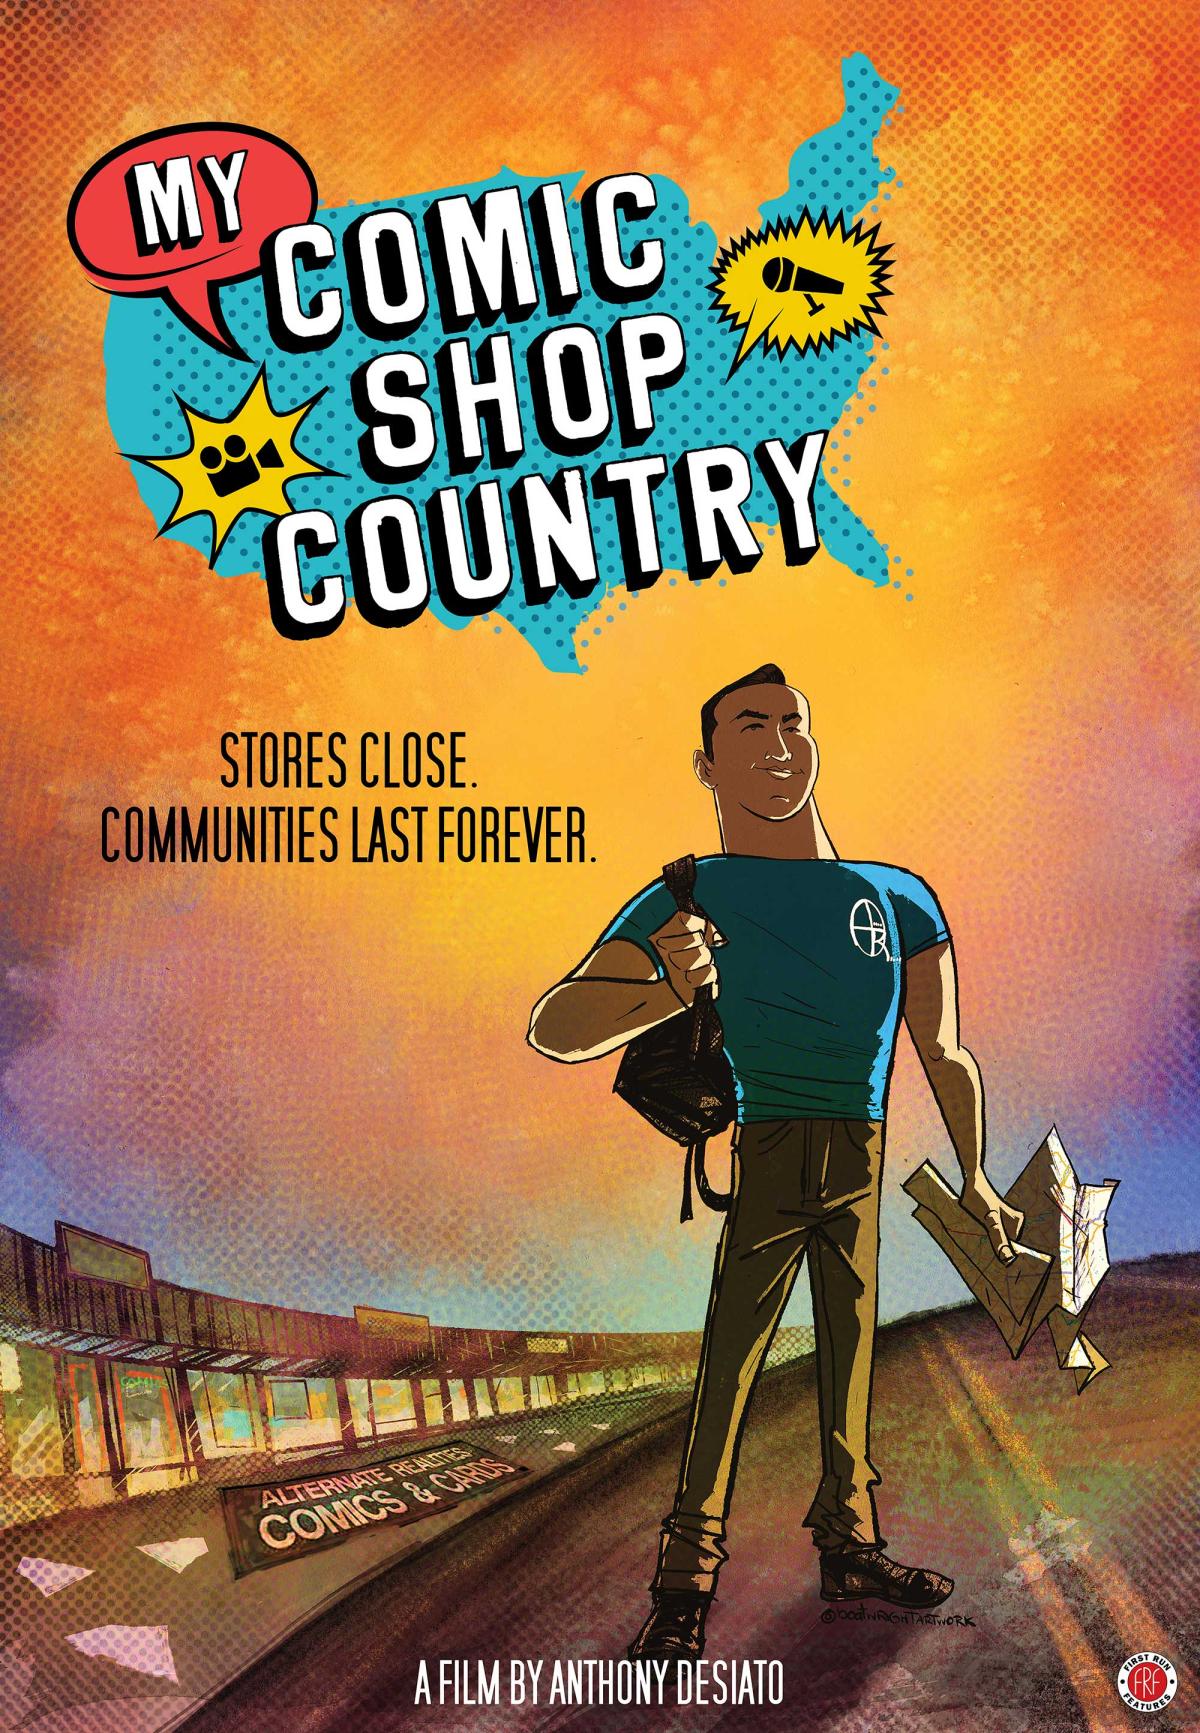 Poster for documentary film My Comic Shop Country